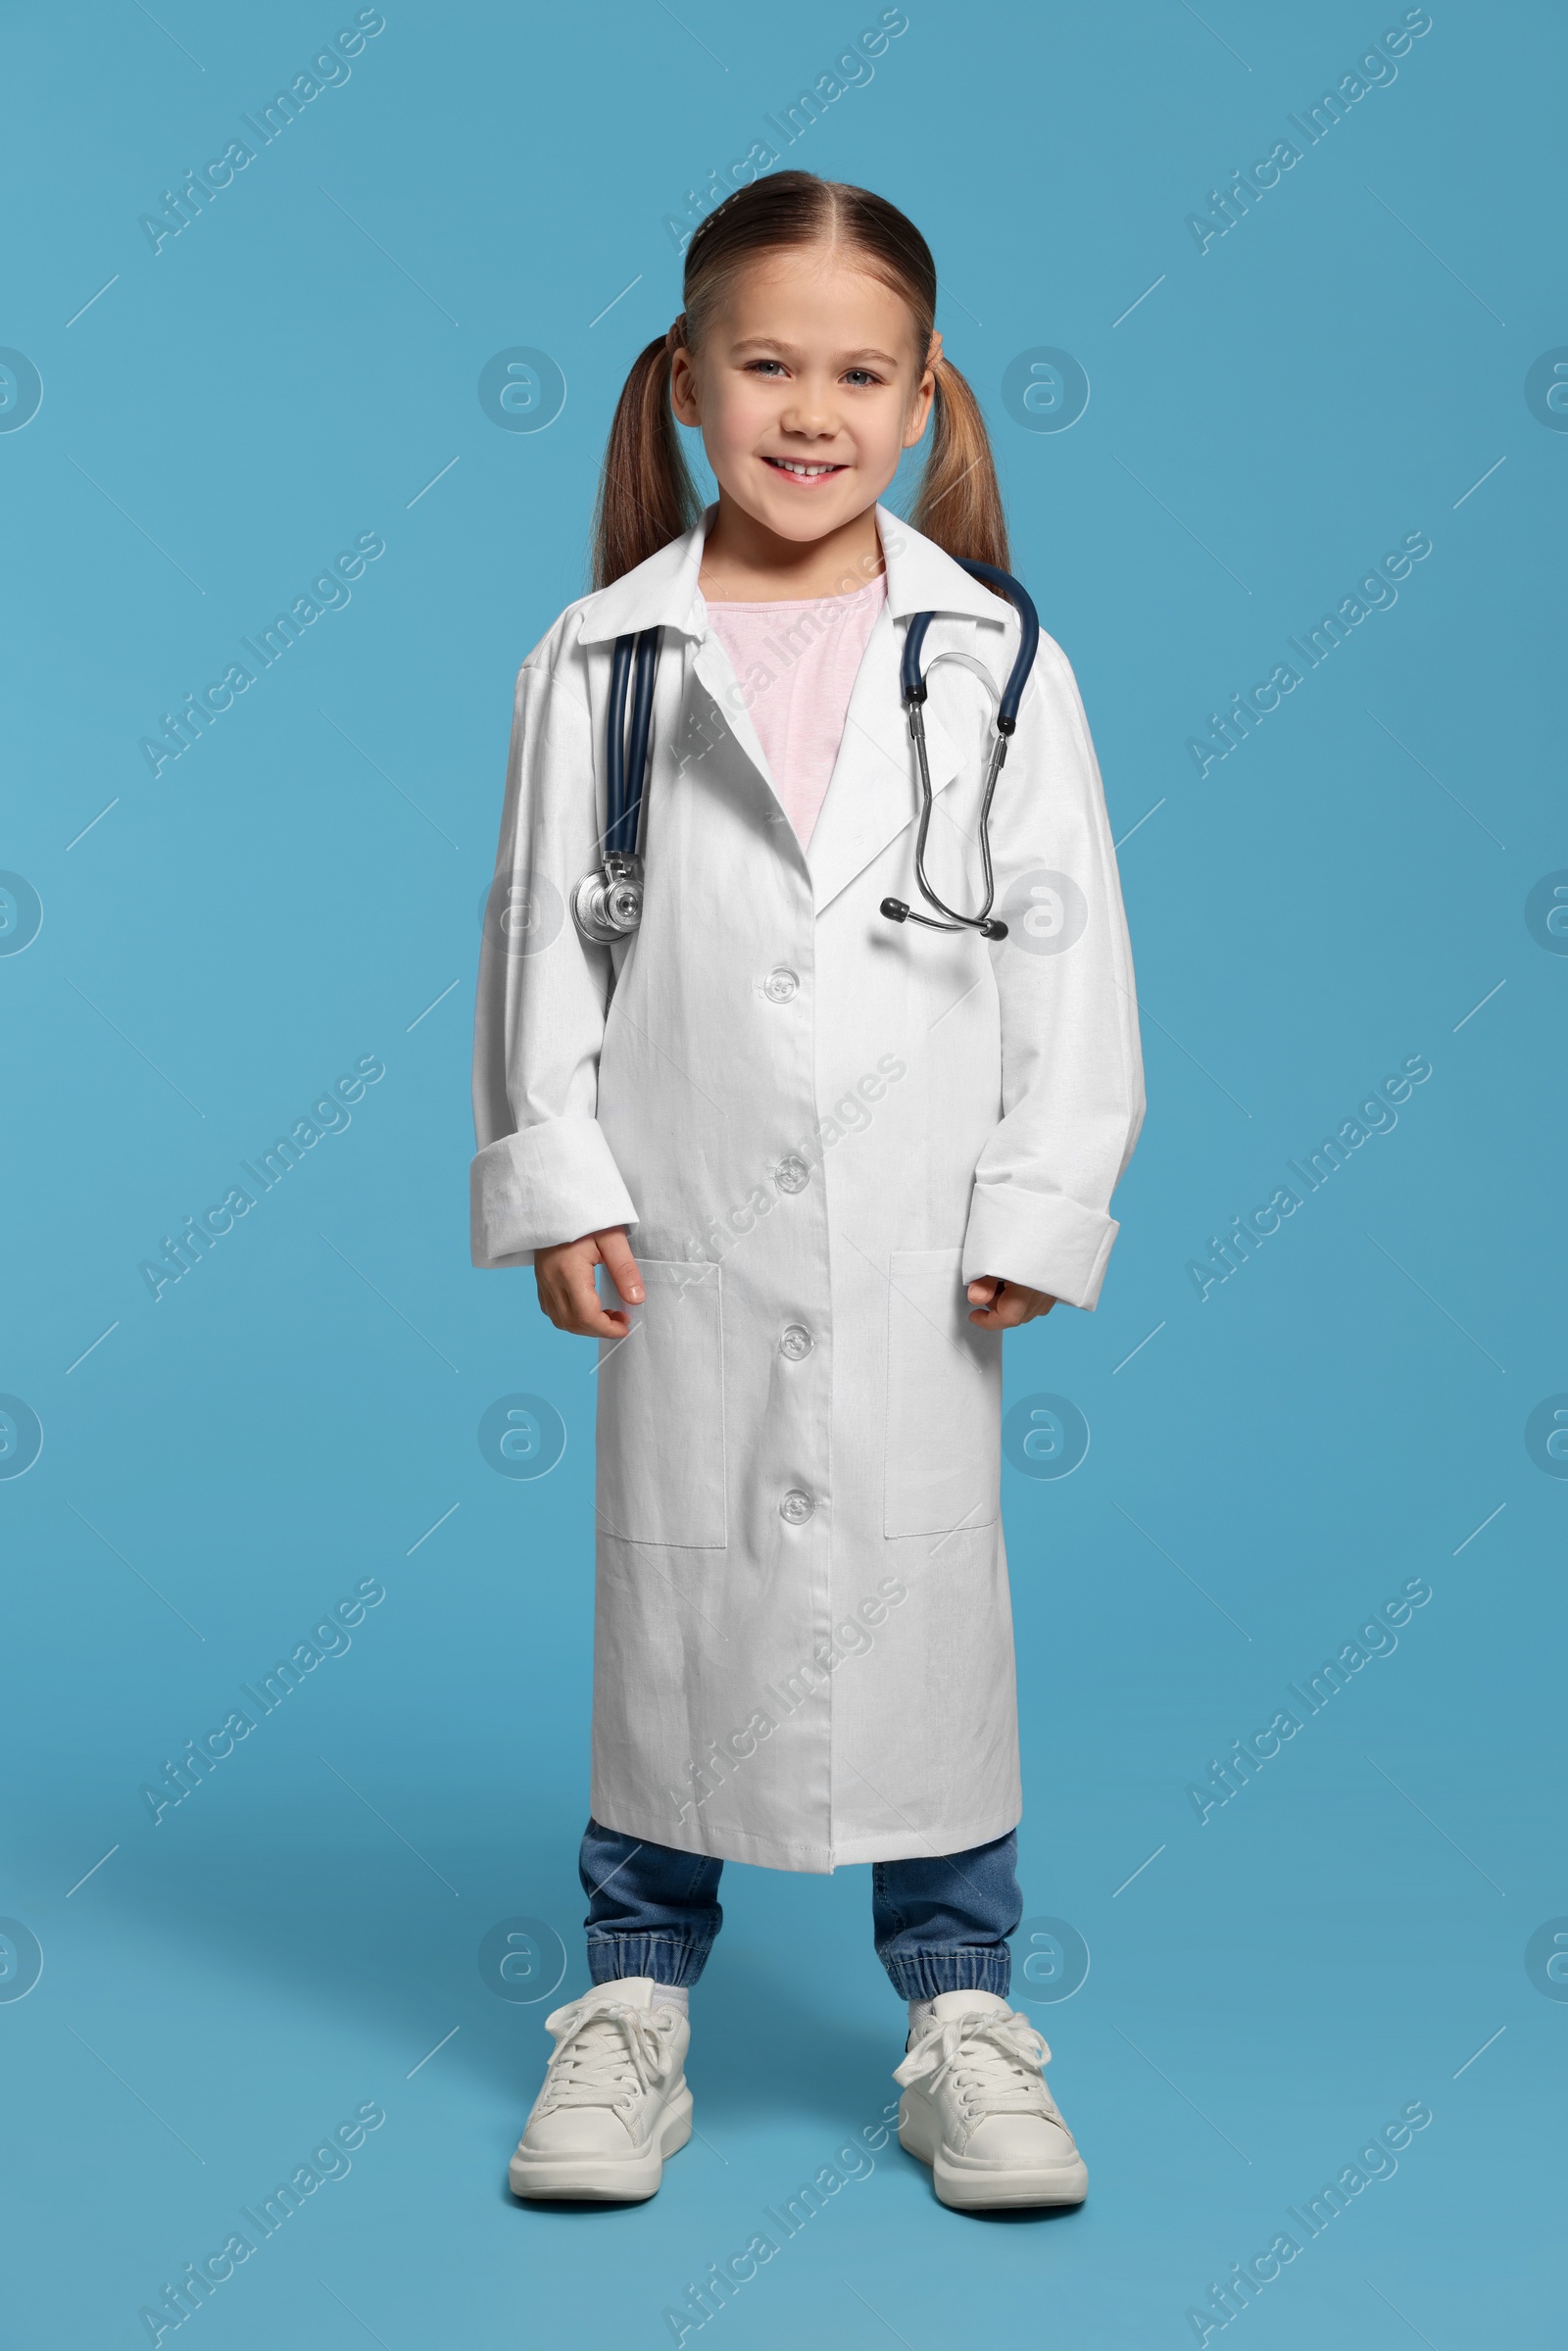 Photo of Little girl in medical uniform with stethoscope on light blue background